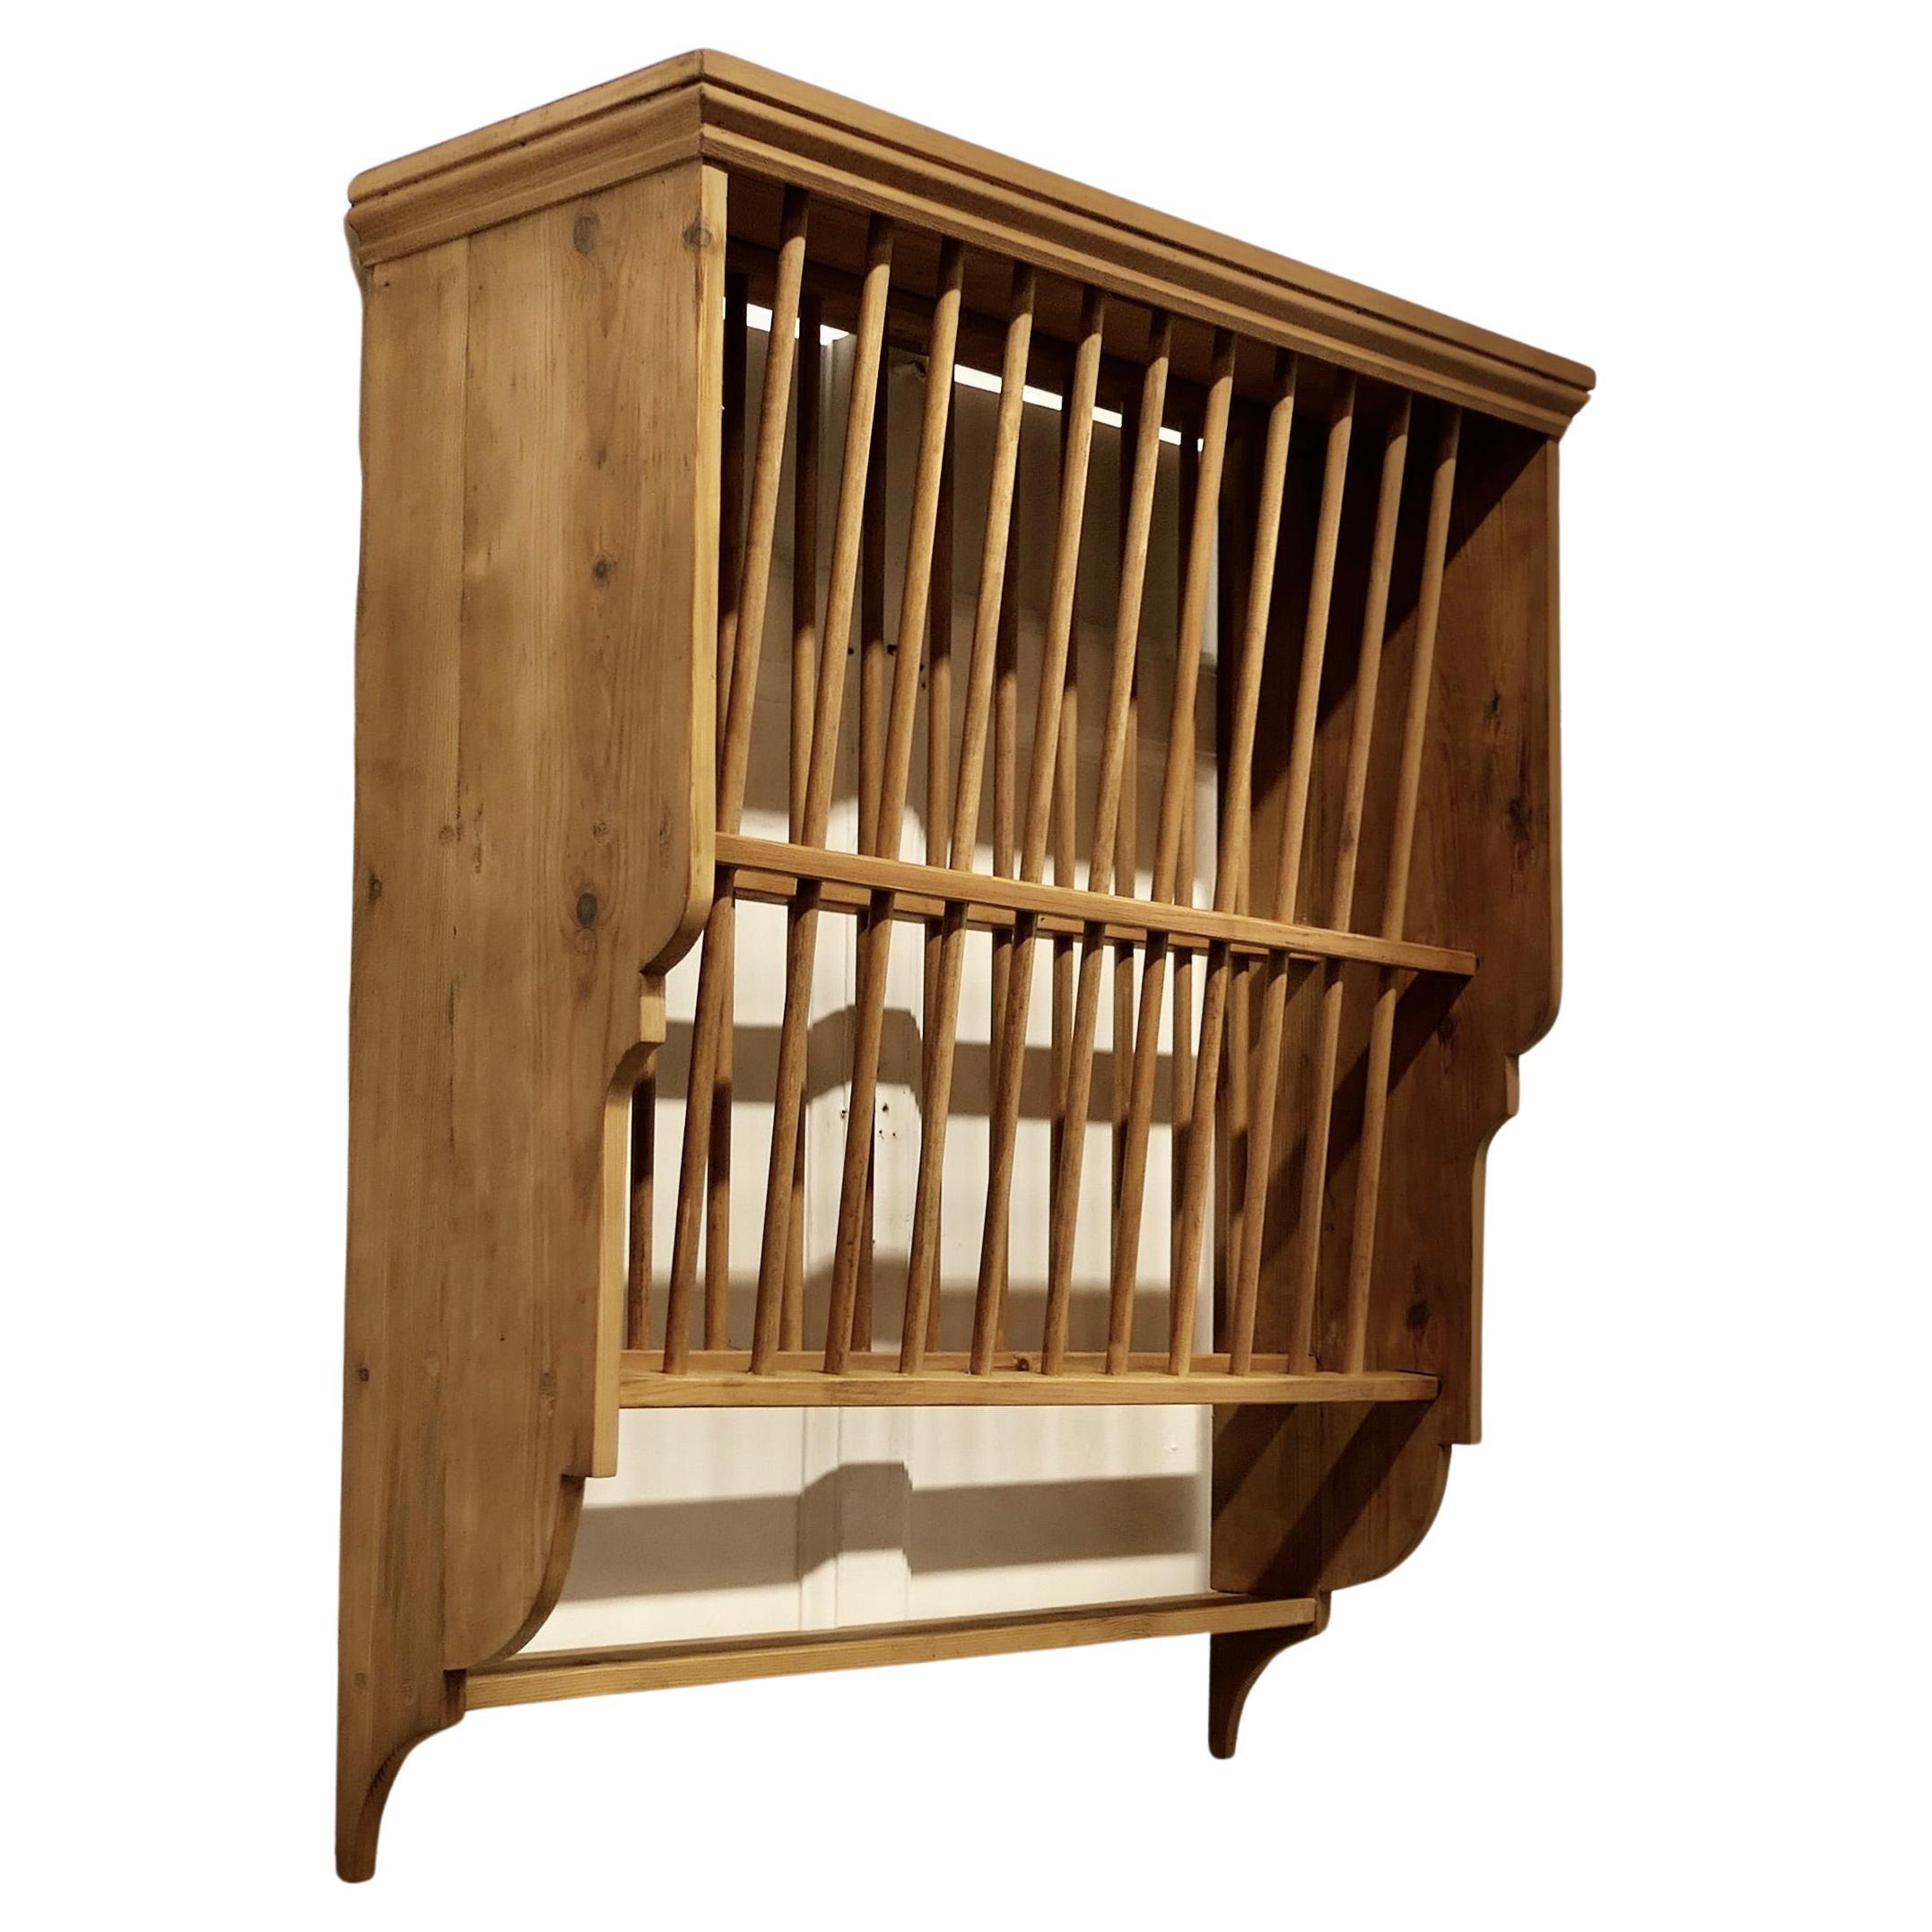 A Large Wall Hanging Pine Plate Rack For Sale